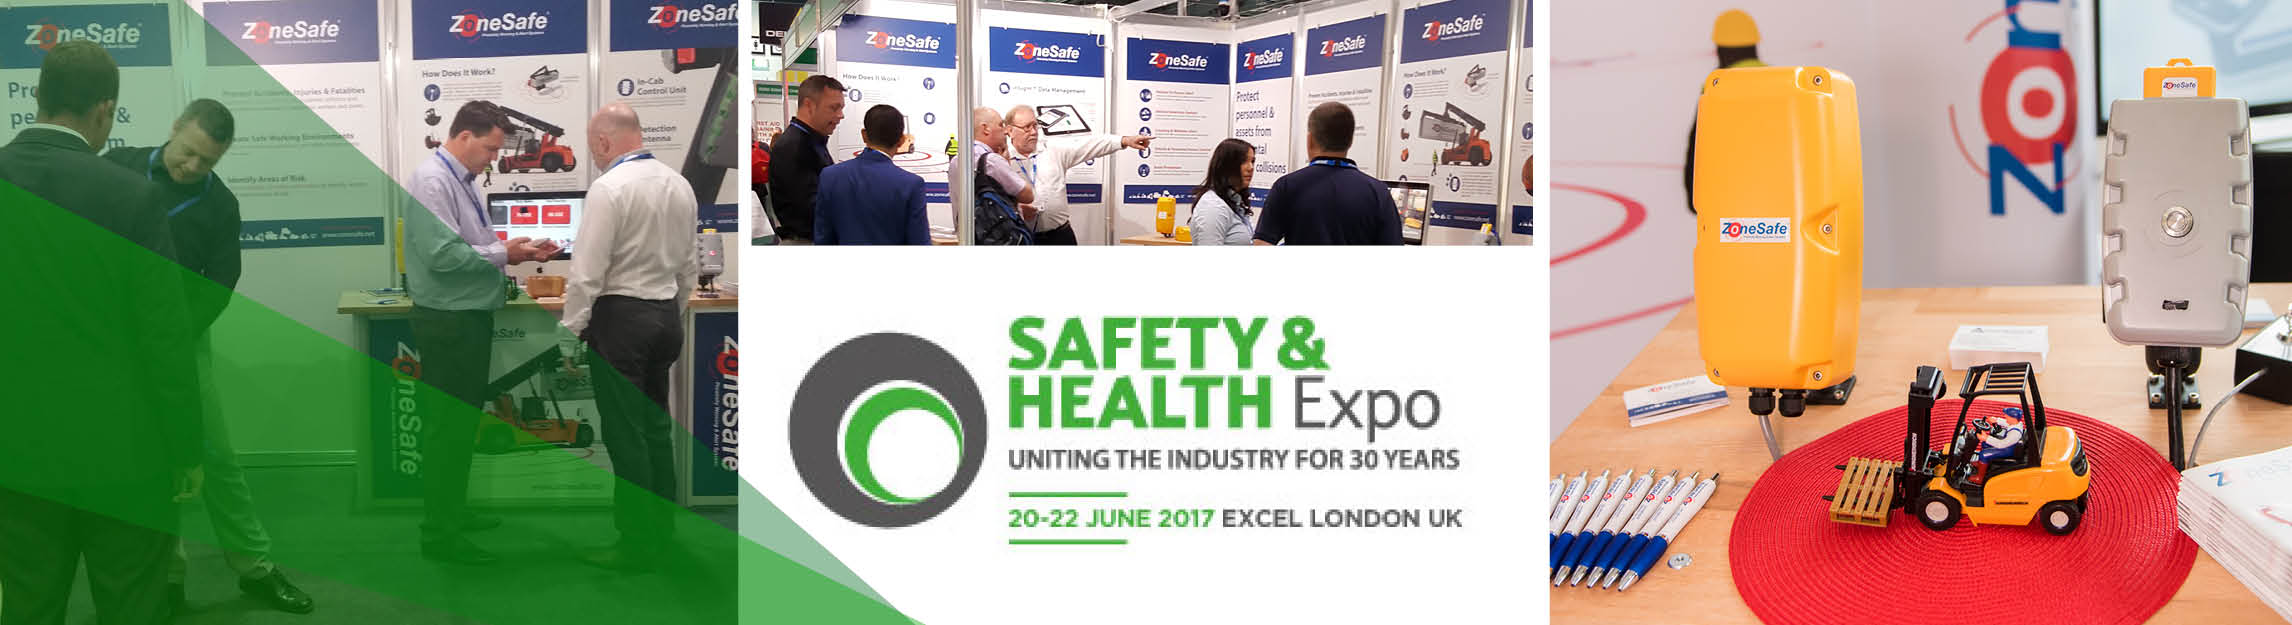 We are exhibiting at the Safety and Health Expo at the Excel, London.